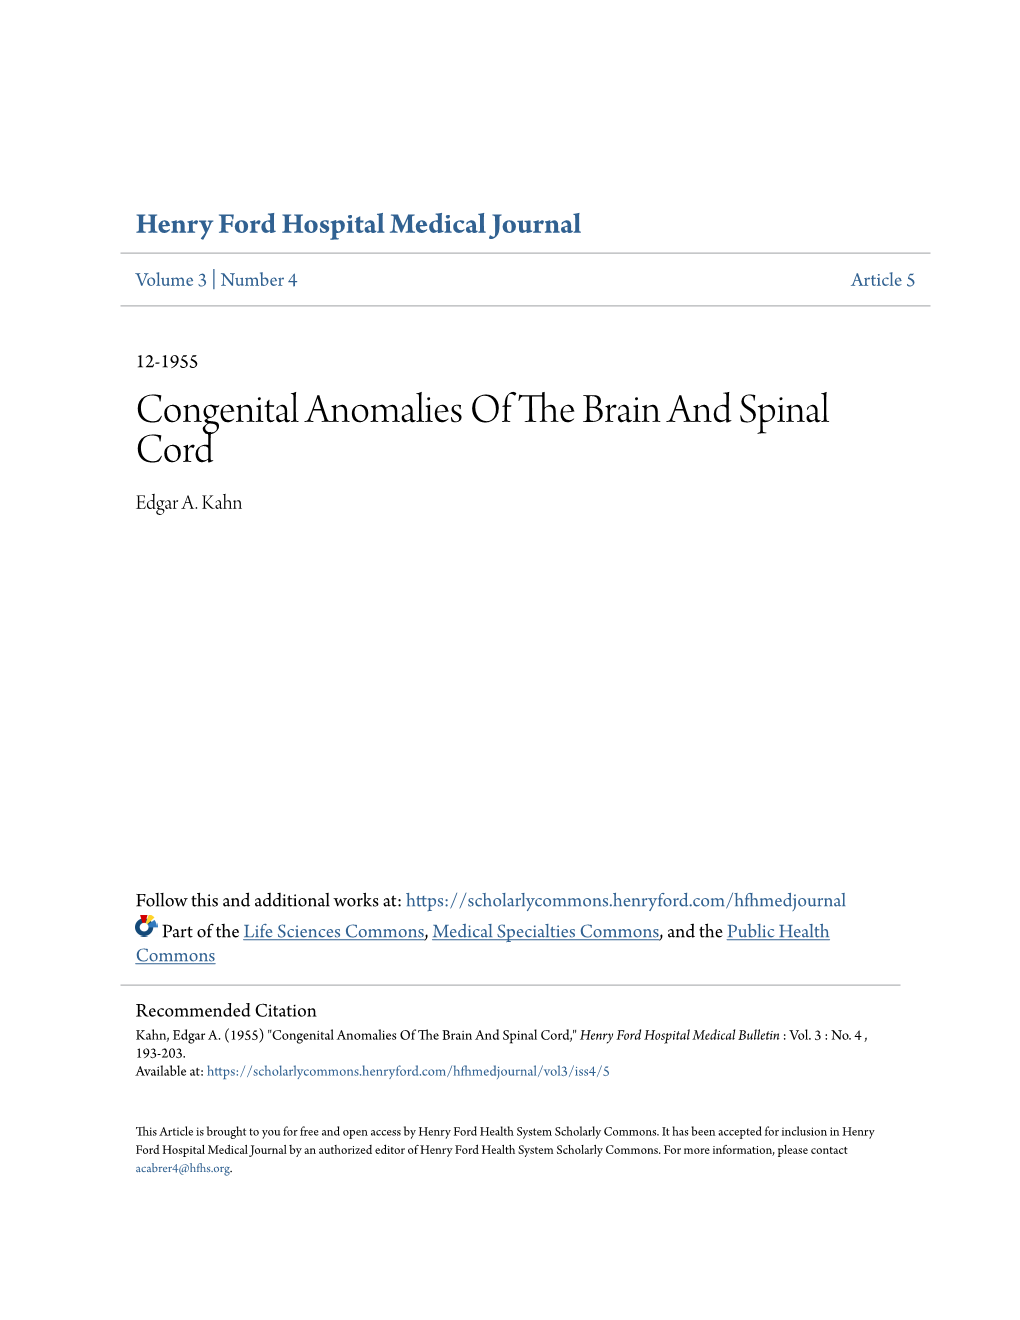 Congenital Anomalies of the Brain and Spinal Cord Edgar A